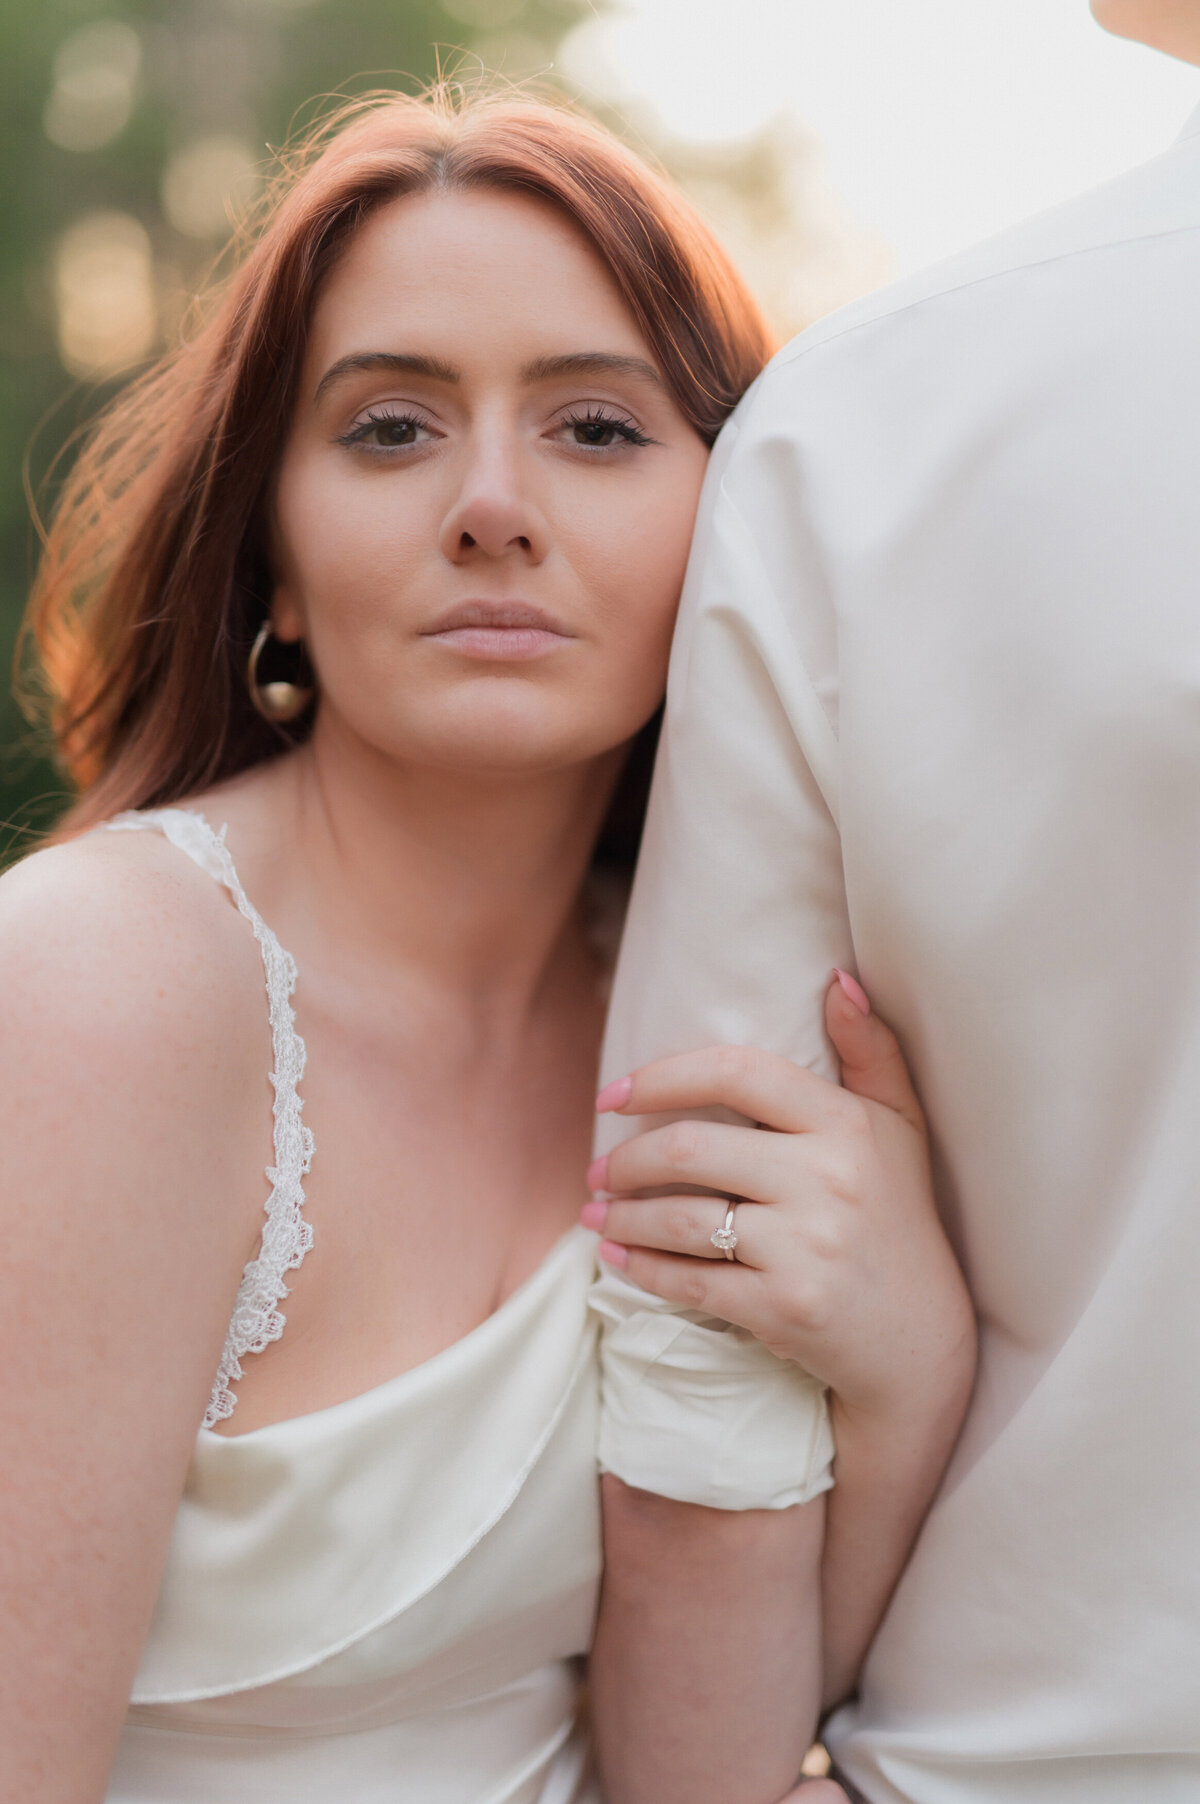 french countryside estate engagement session in ipswich massachusetts. women with red hair and white dress for fine art portraits in New England.